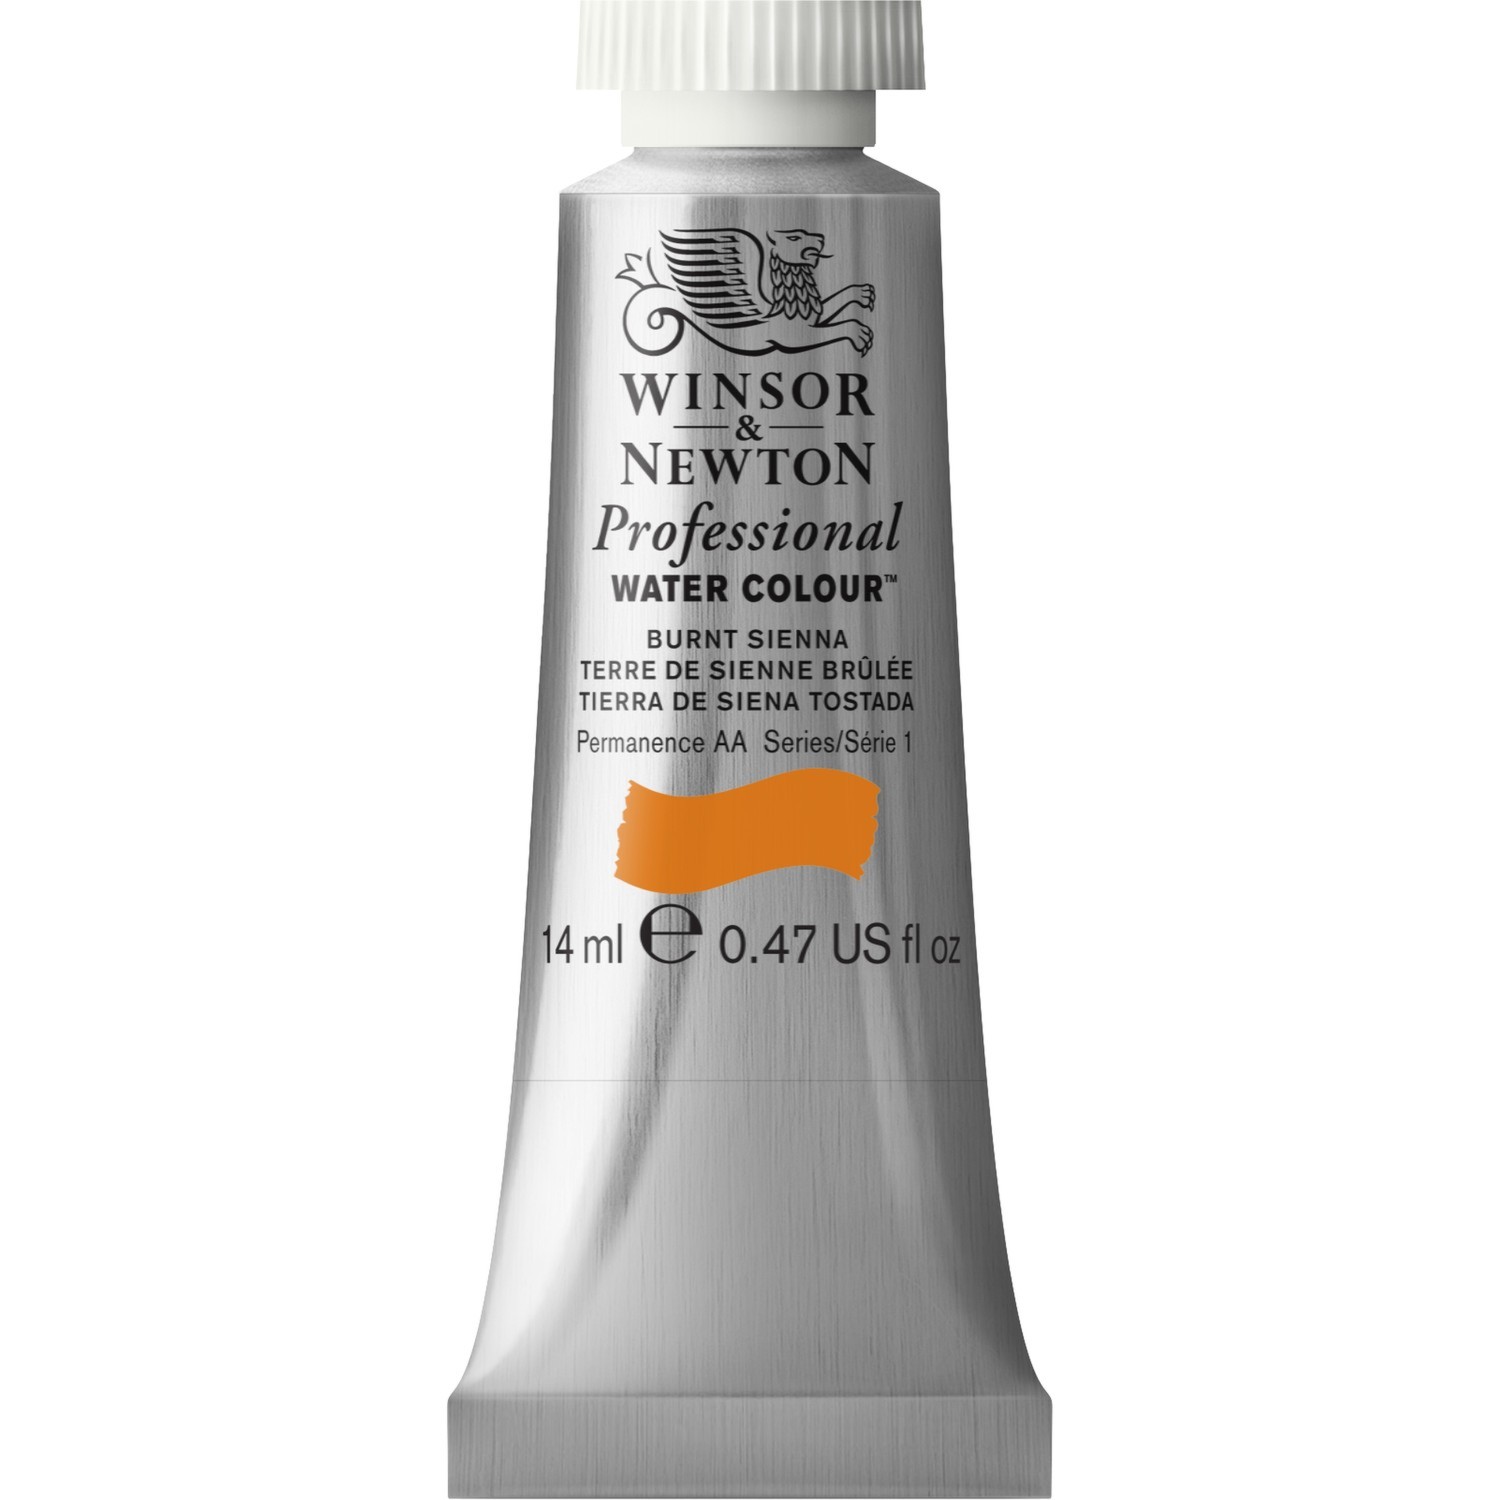 Winsor and Newton 14ml Professional Watercolour Paint - Burnt Sienna Image 1